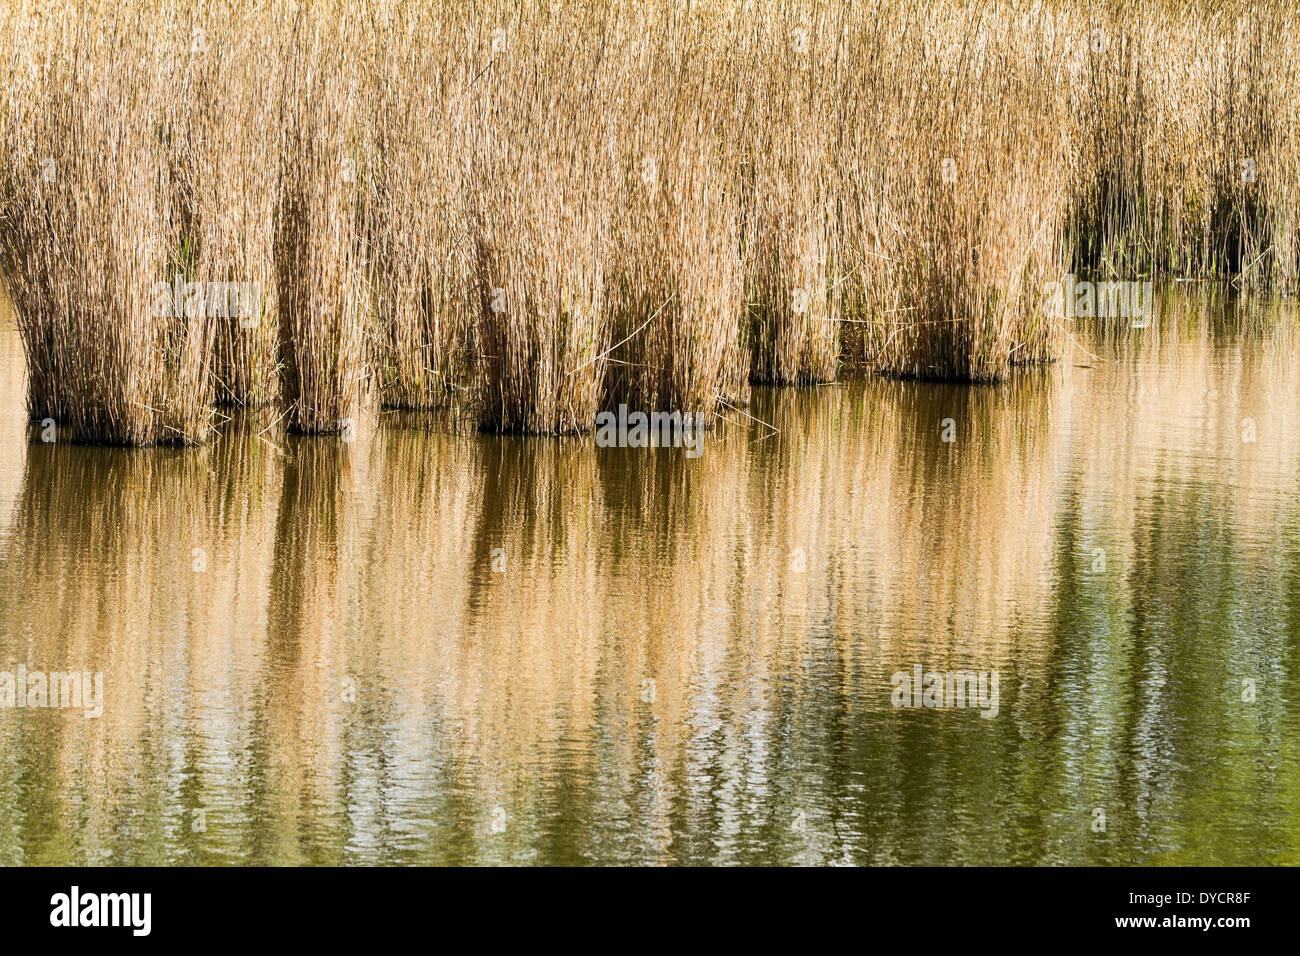 This reed is so beautiful with reflection on water Stock Photo